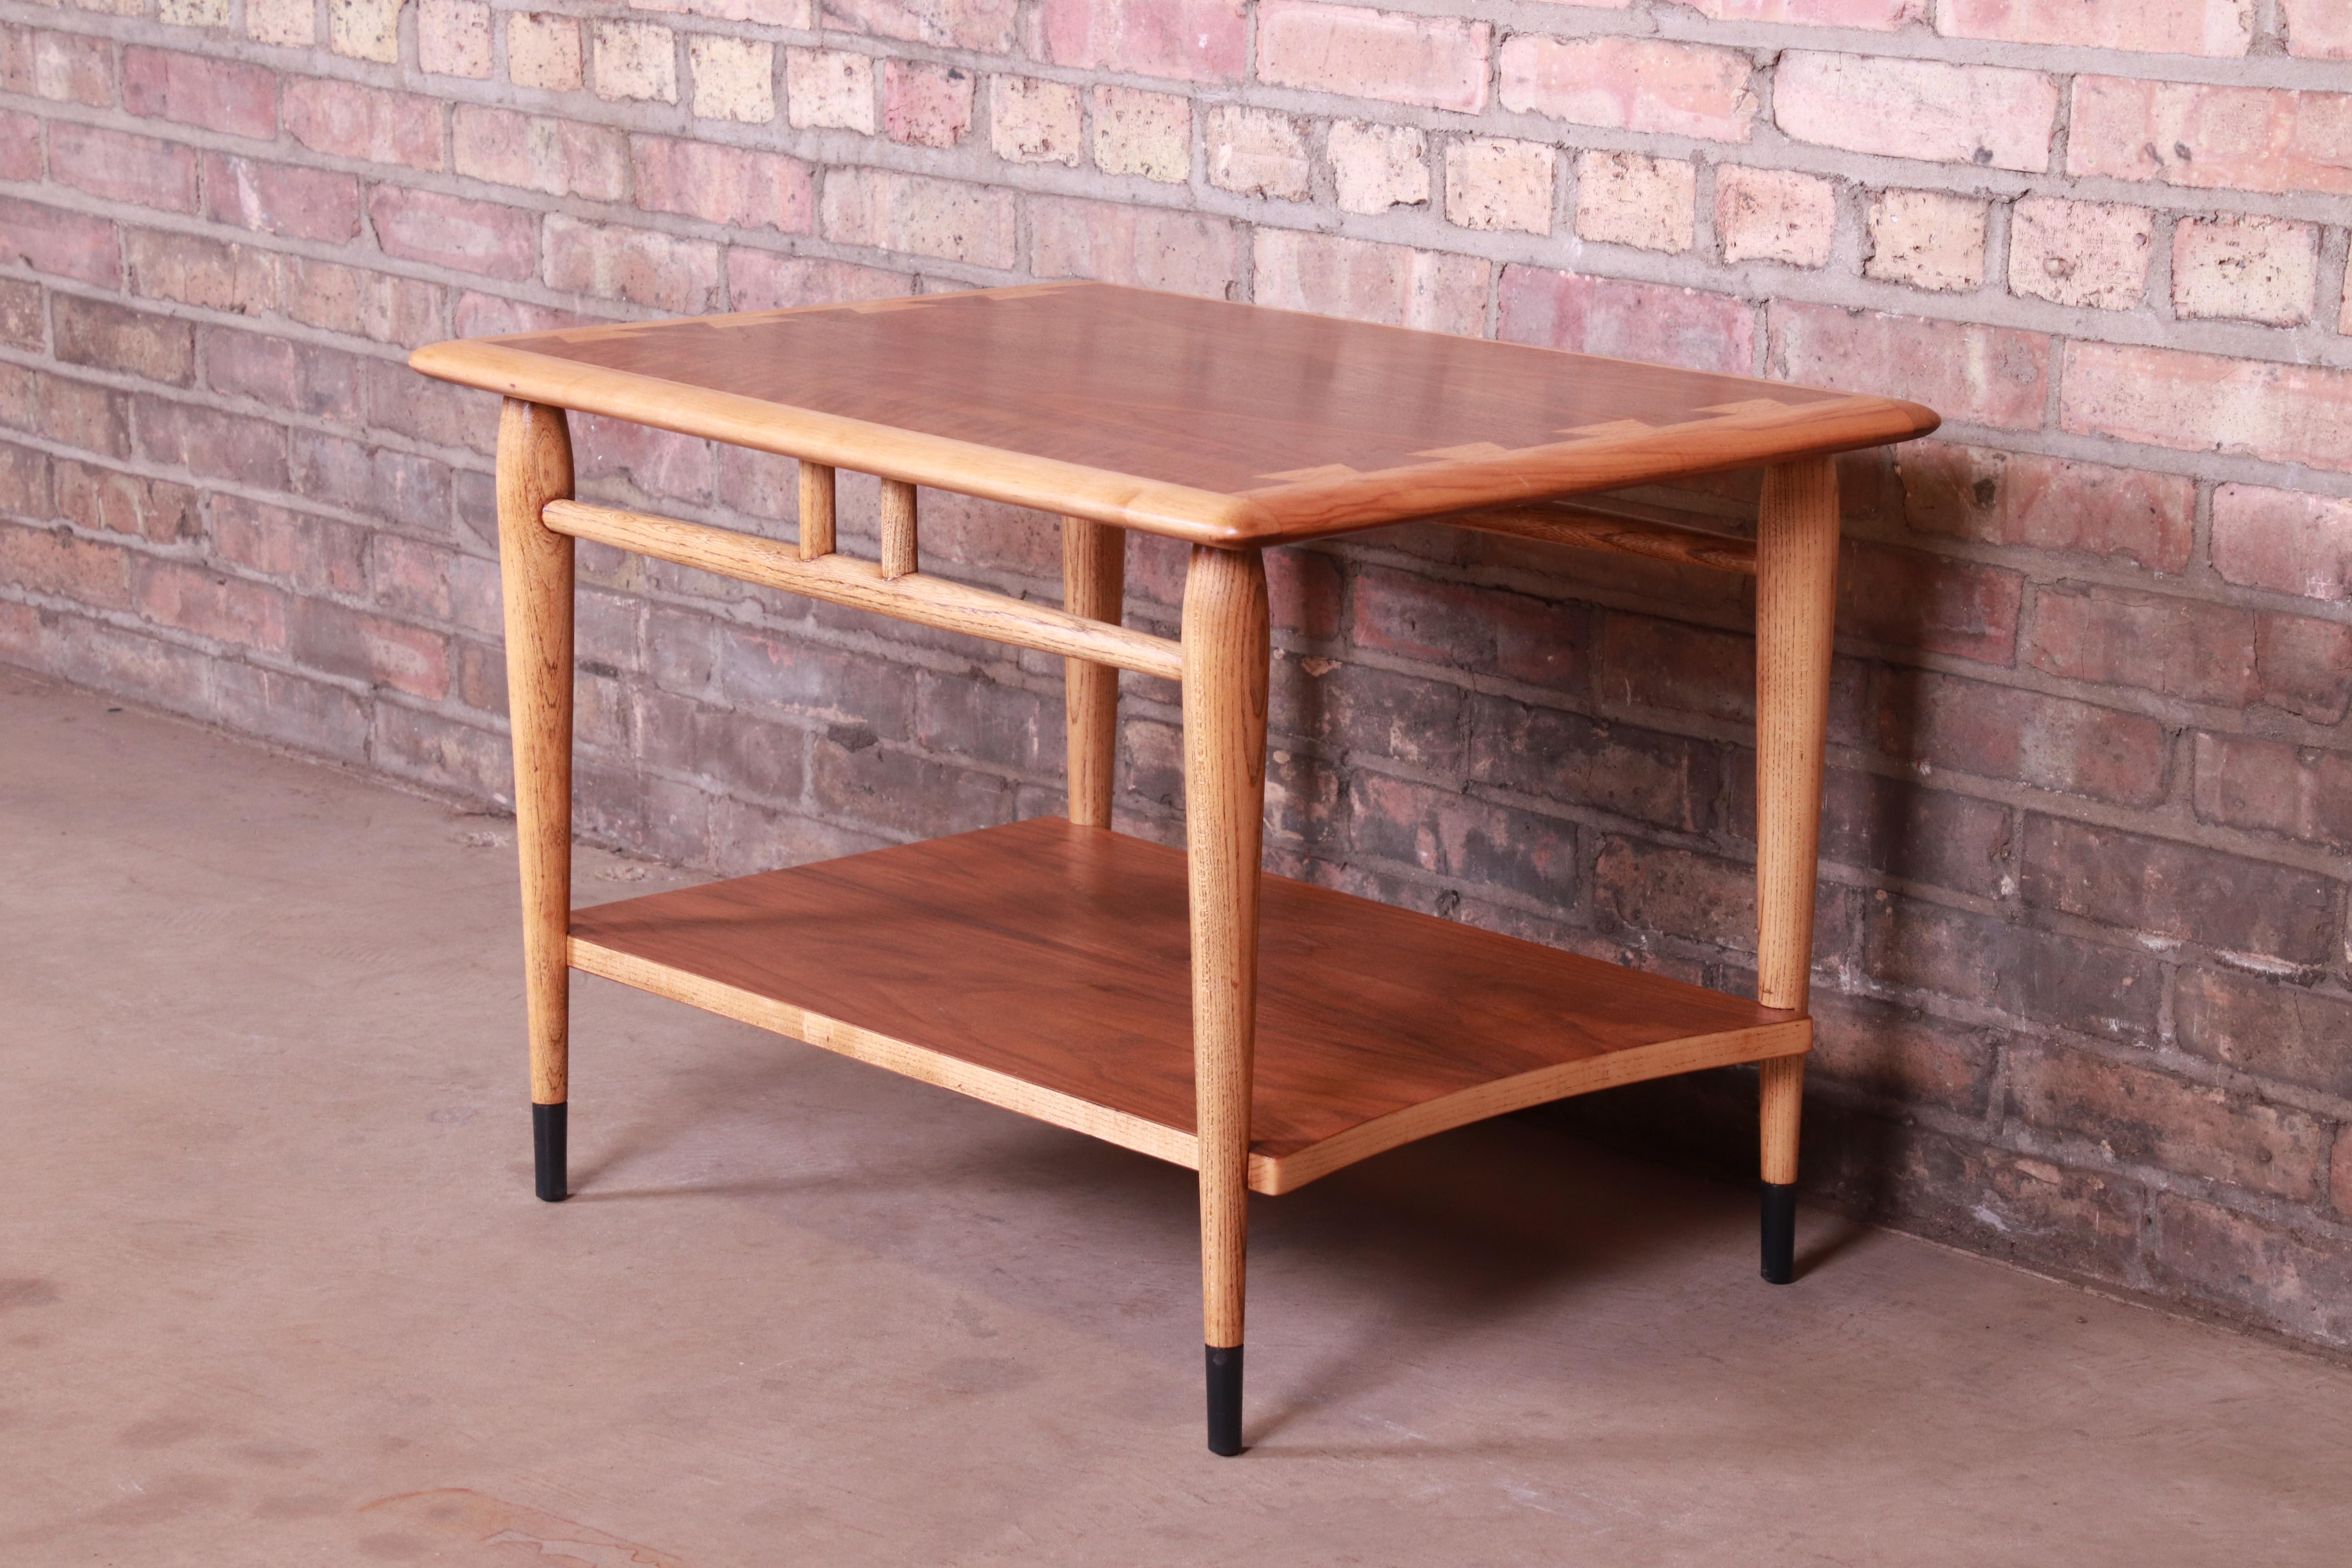 A gorgeous Mid-Century Modern side table

Designed by Andre Bus for Lane Furniture 